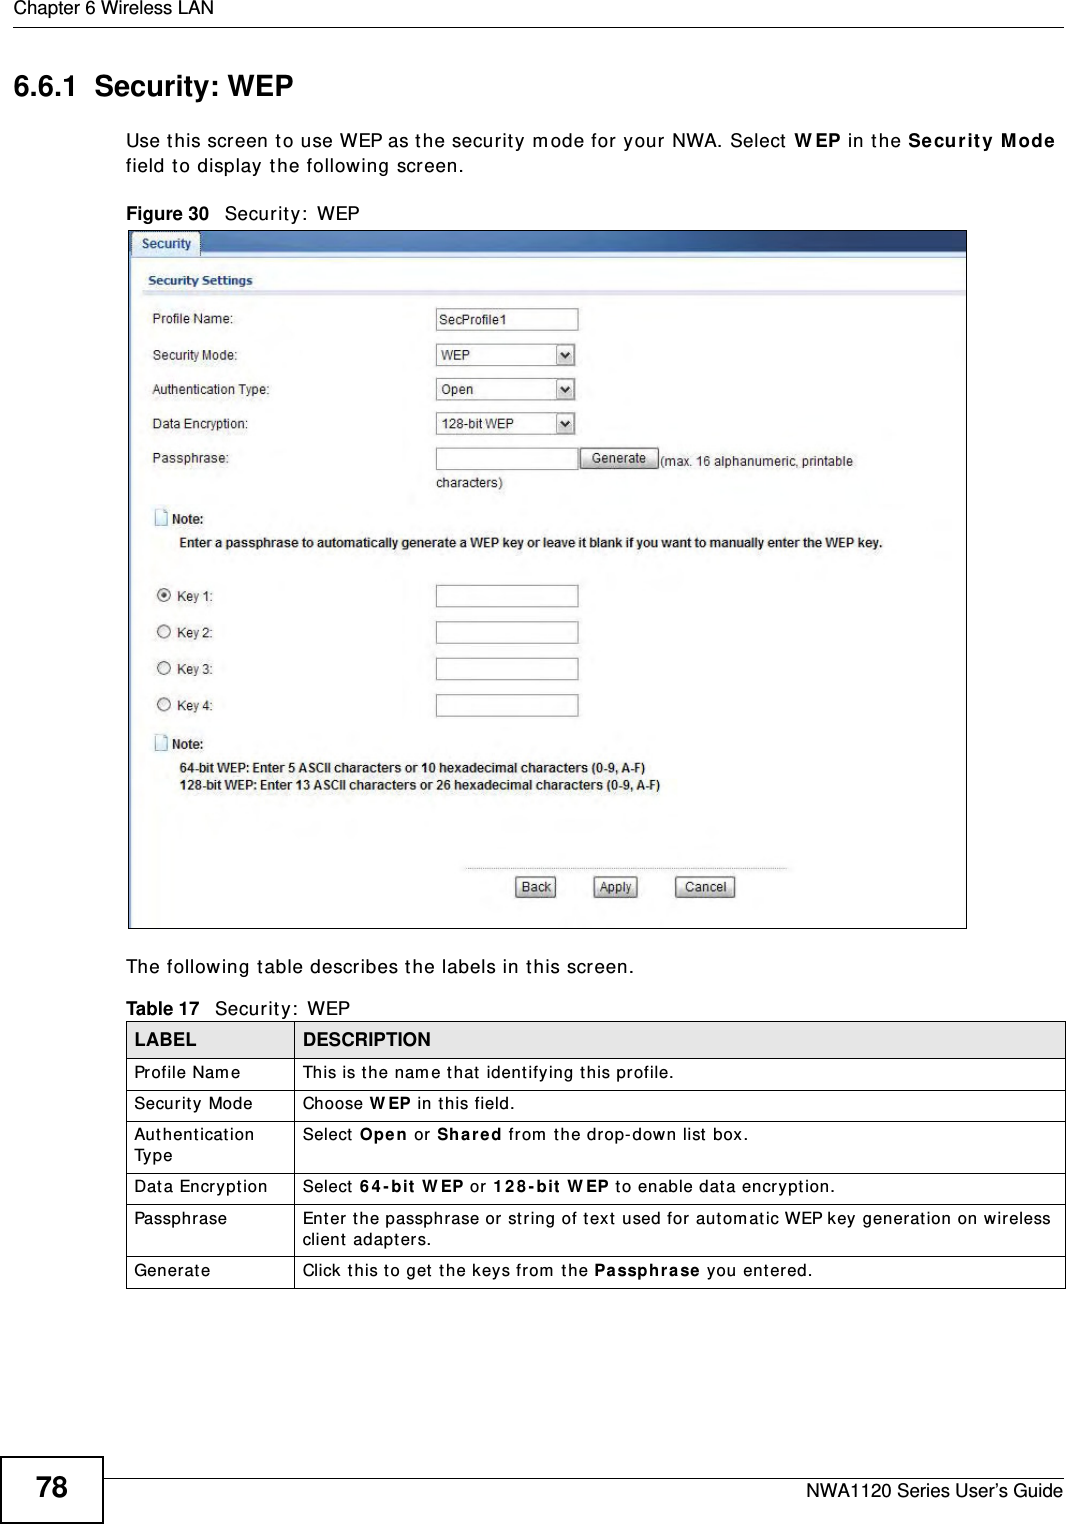 Chapter 6 Wireless LANNWA1120 Series User’s Guide786.6.1  Security: WEPUse this screen to use WEP as the security mode for your NWA. Select WEP in the Security Mode field to display the following screen.Figure 30   Security: WEPThe following table describes the labels in this screen.Table 17   Security: WEPLABEL DESCRIPTIONProfile Name This is the name that identifying this profile.Security Mode Choose WEP in this field.Authentication Type Select Open or Shared from the drop-down list box. Data Encryption Select 64-bit WEP or 128-bit WEP to enable data encryption.  Passphrase Enter the passphrase or string of text used for automatic WEP key generation on wireless client adapters. Generate Click this to get the keys from the Passphrase you entered.